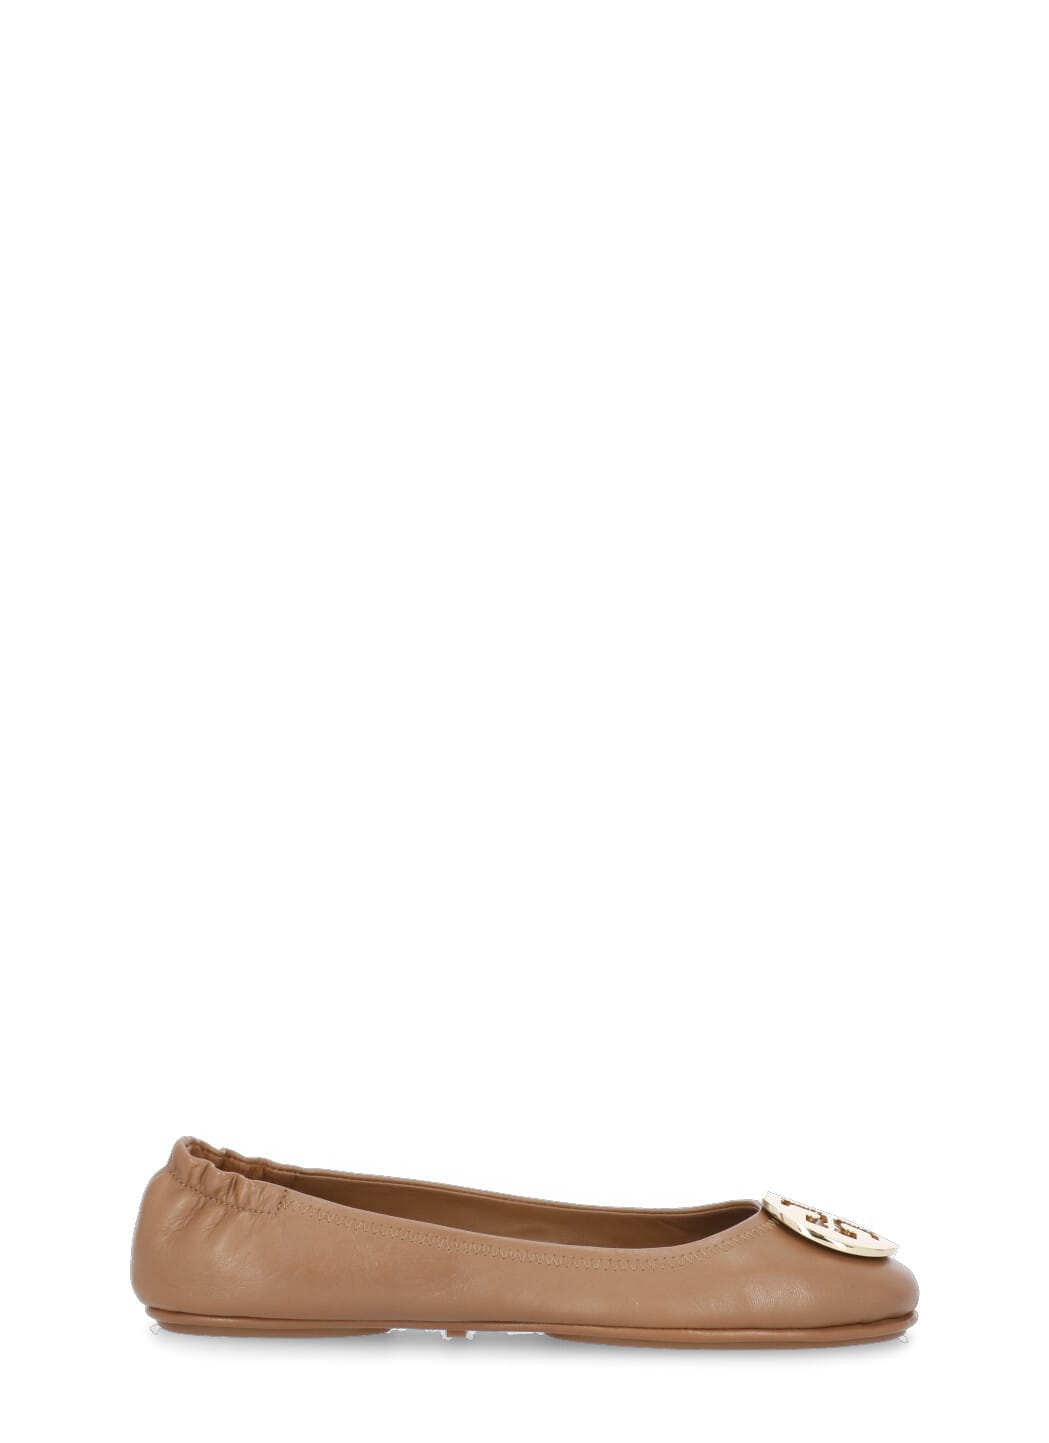 Tory Burch Minnie Ballerina Shoes In Brown